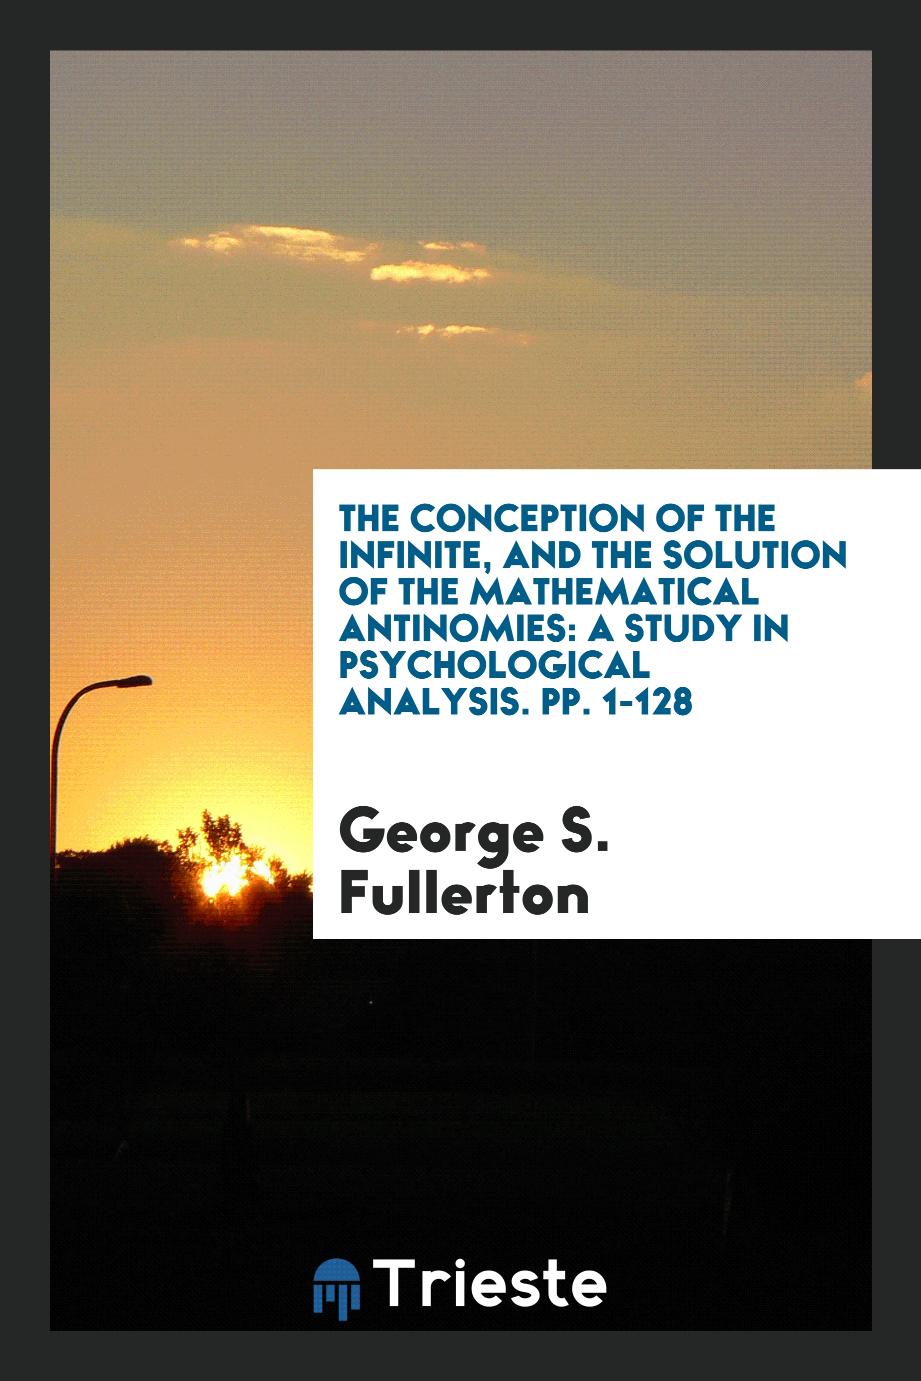 The Conception of the Infinite, and the Solution of the Mathematical Antinomies: A Study in Psychological Analysis. pp. 1-128